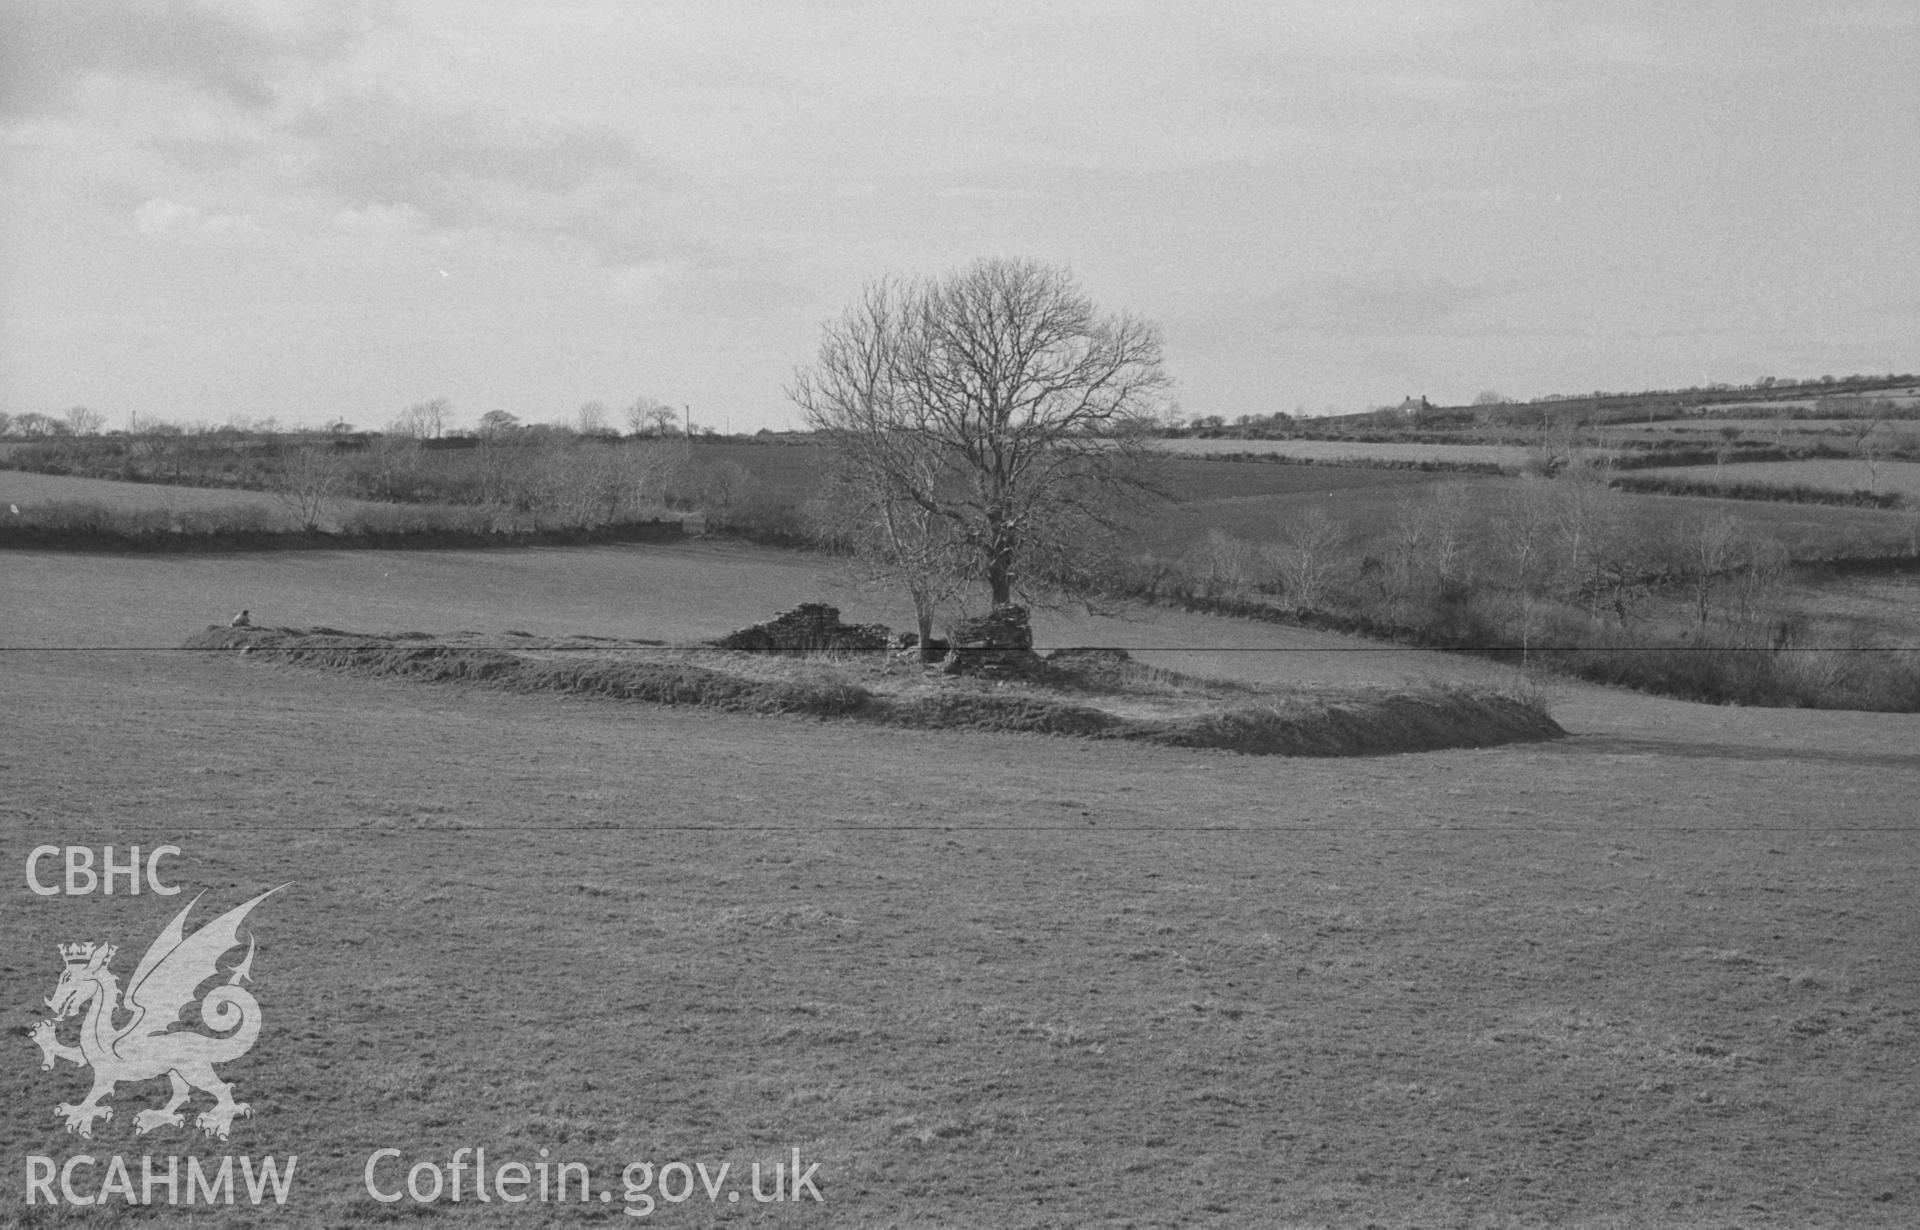 Digital copy of a black and white negative showing site of St Mary's church, Llanfair Trefhelygen. Photographed in April 1963 by Arthur O. Chater from Grid Reference SN 3443 4408, looking north west.